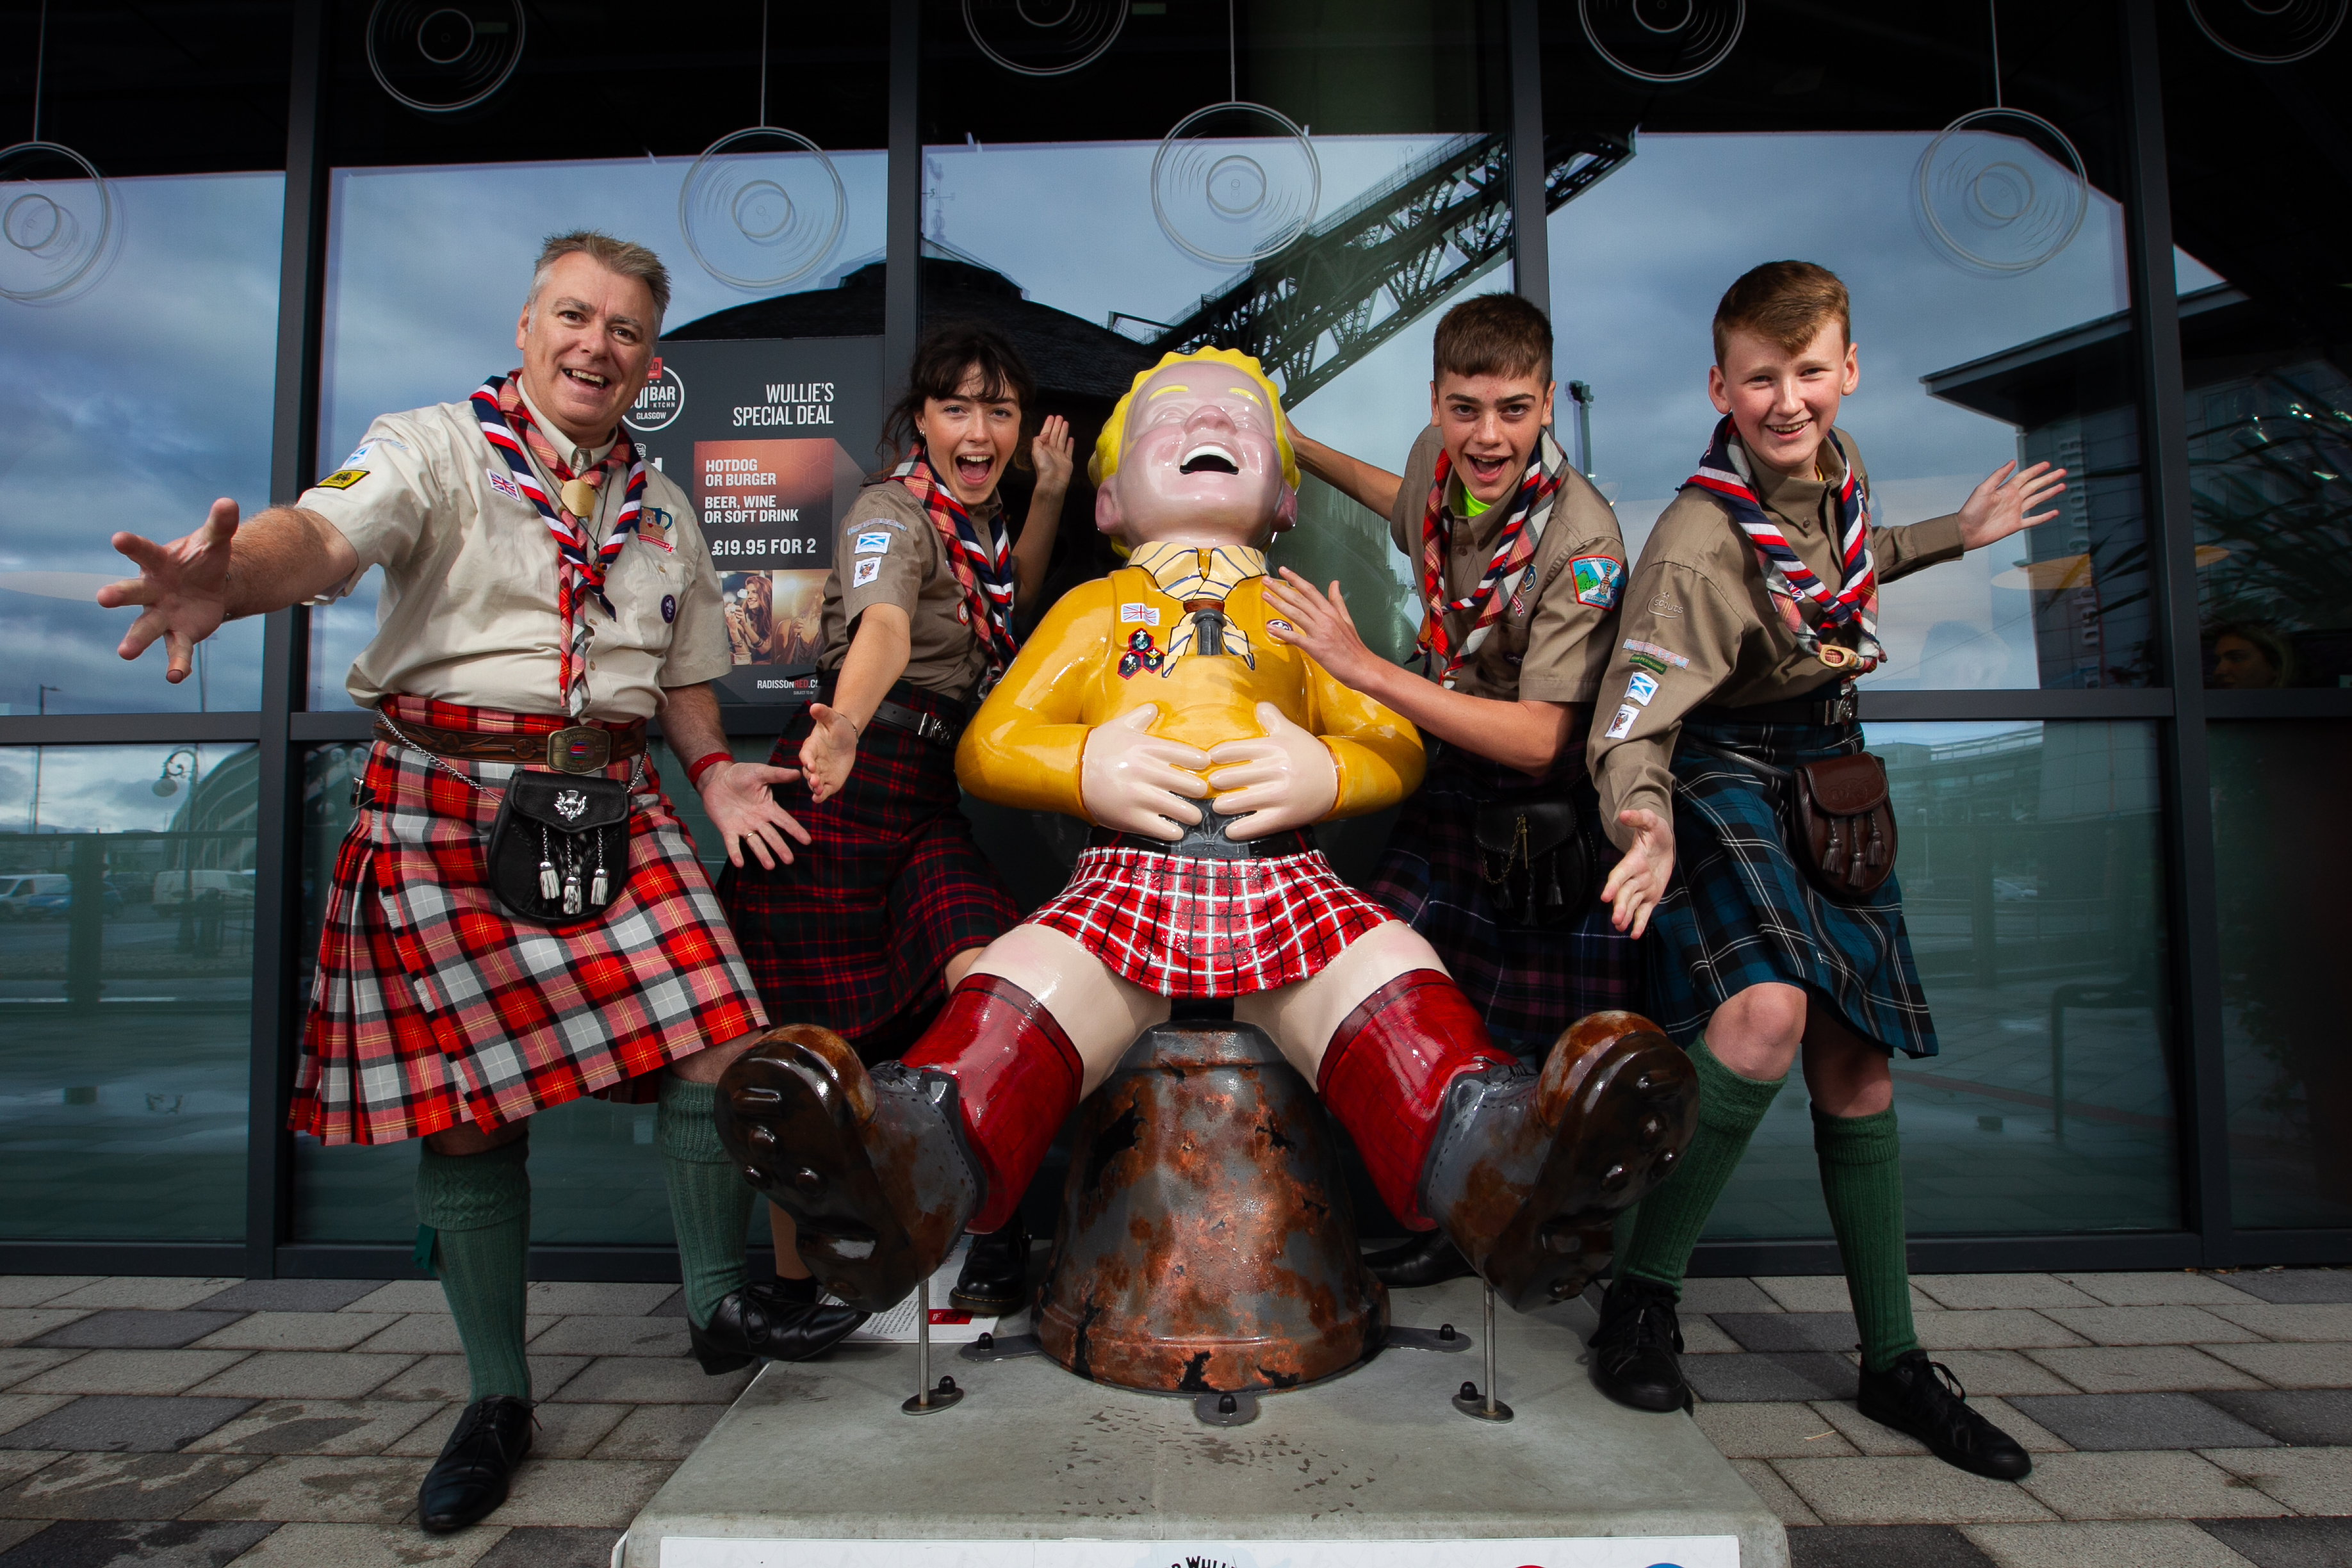 Derek Dunsire, Ellie Perkins, Jack Sharp and Rory Dent of the East Scotland Scouts – who are hoping to raise enough cash to buy a Wullie statue – at the Radisson Red Hotel in Glasgow